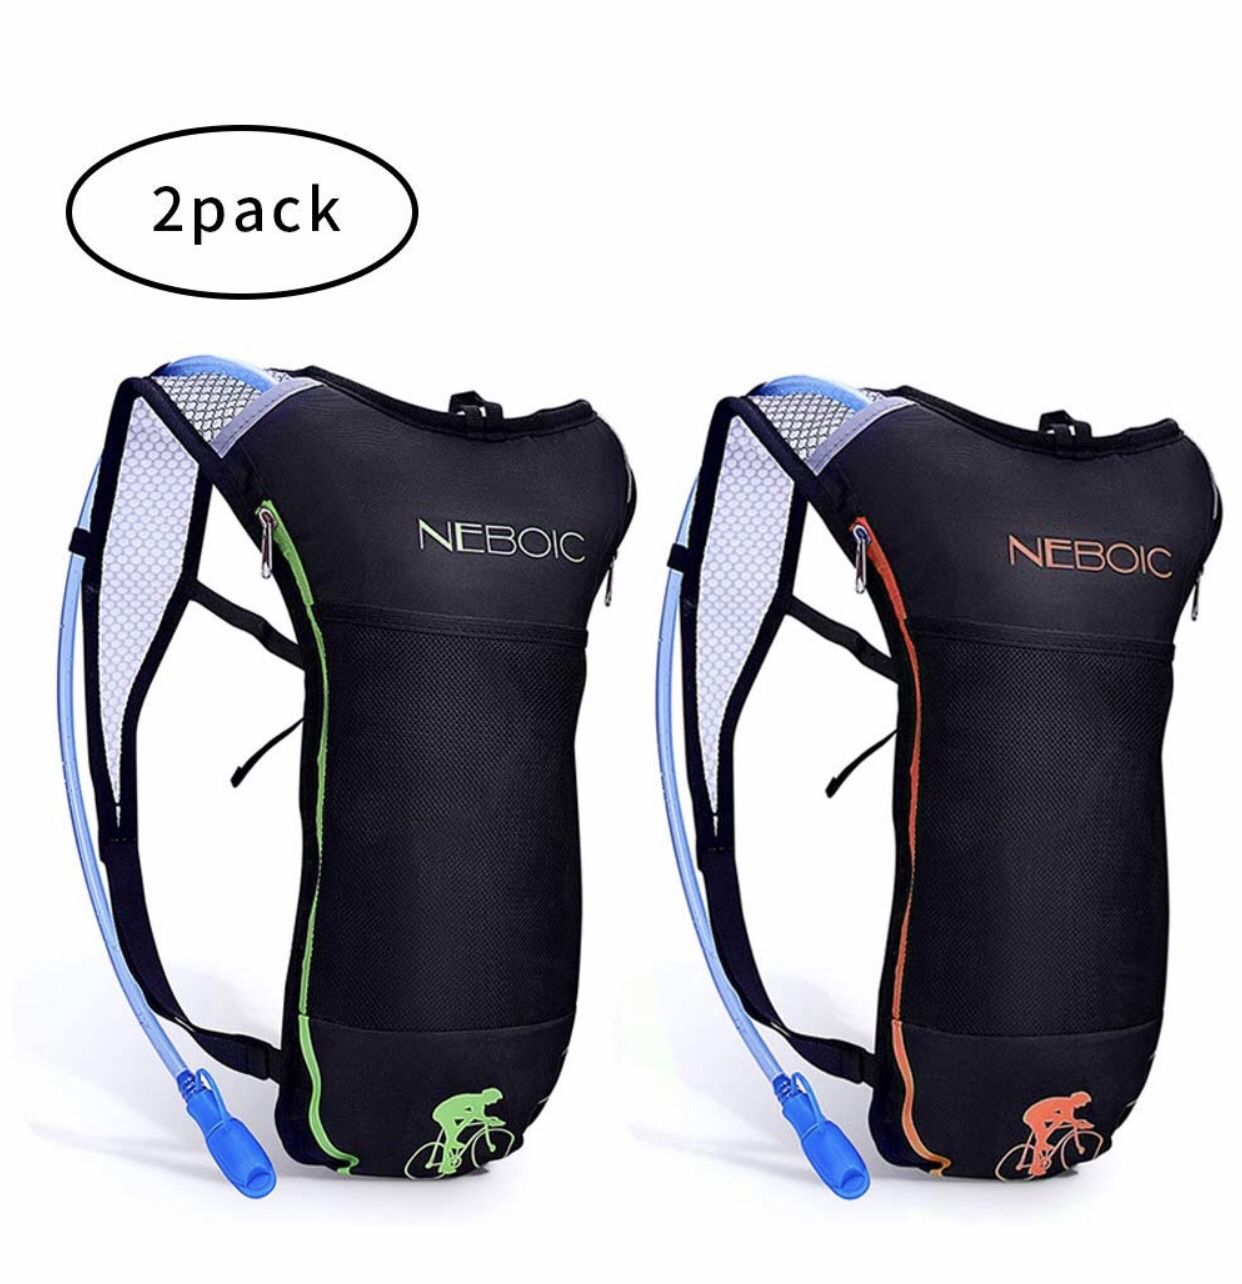 2 Pack Hydration Backpack Pack with 2L Hydration Bladder - Lightweight Water Backpack Keeps Water Cool up to 4 Hours with Big Storage for Kids Women